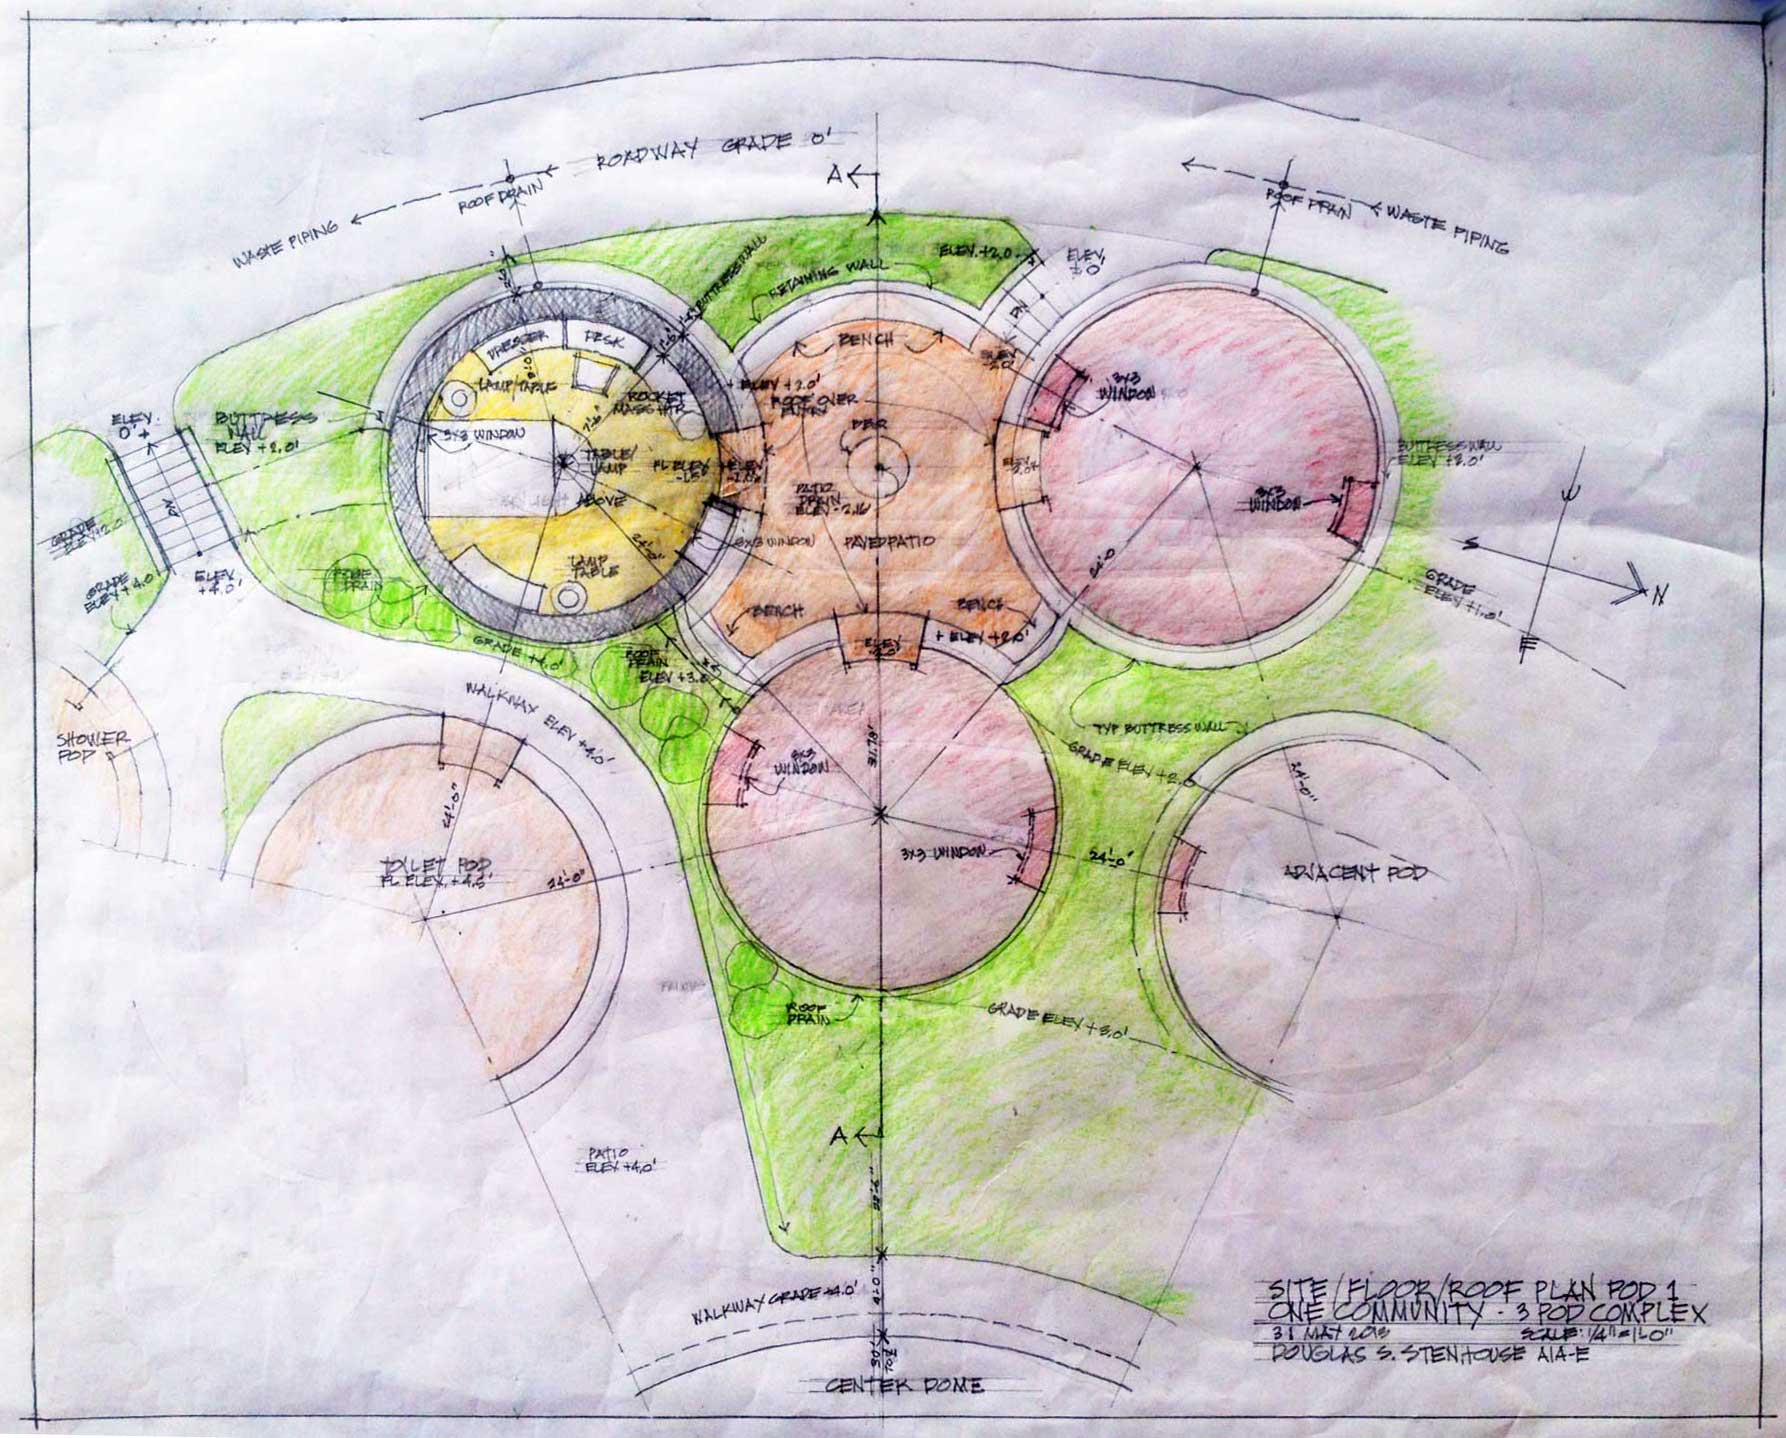 earthbag consruction, superadobe construction, super adobe construction, earth building, earth dome, dome home, One Community, sustainable living, eco living, dirt home, building with earth, earthbag village, sustainable building, construction of the future, facilitating the evolution of sustainability